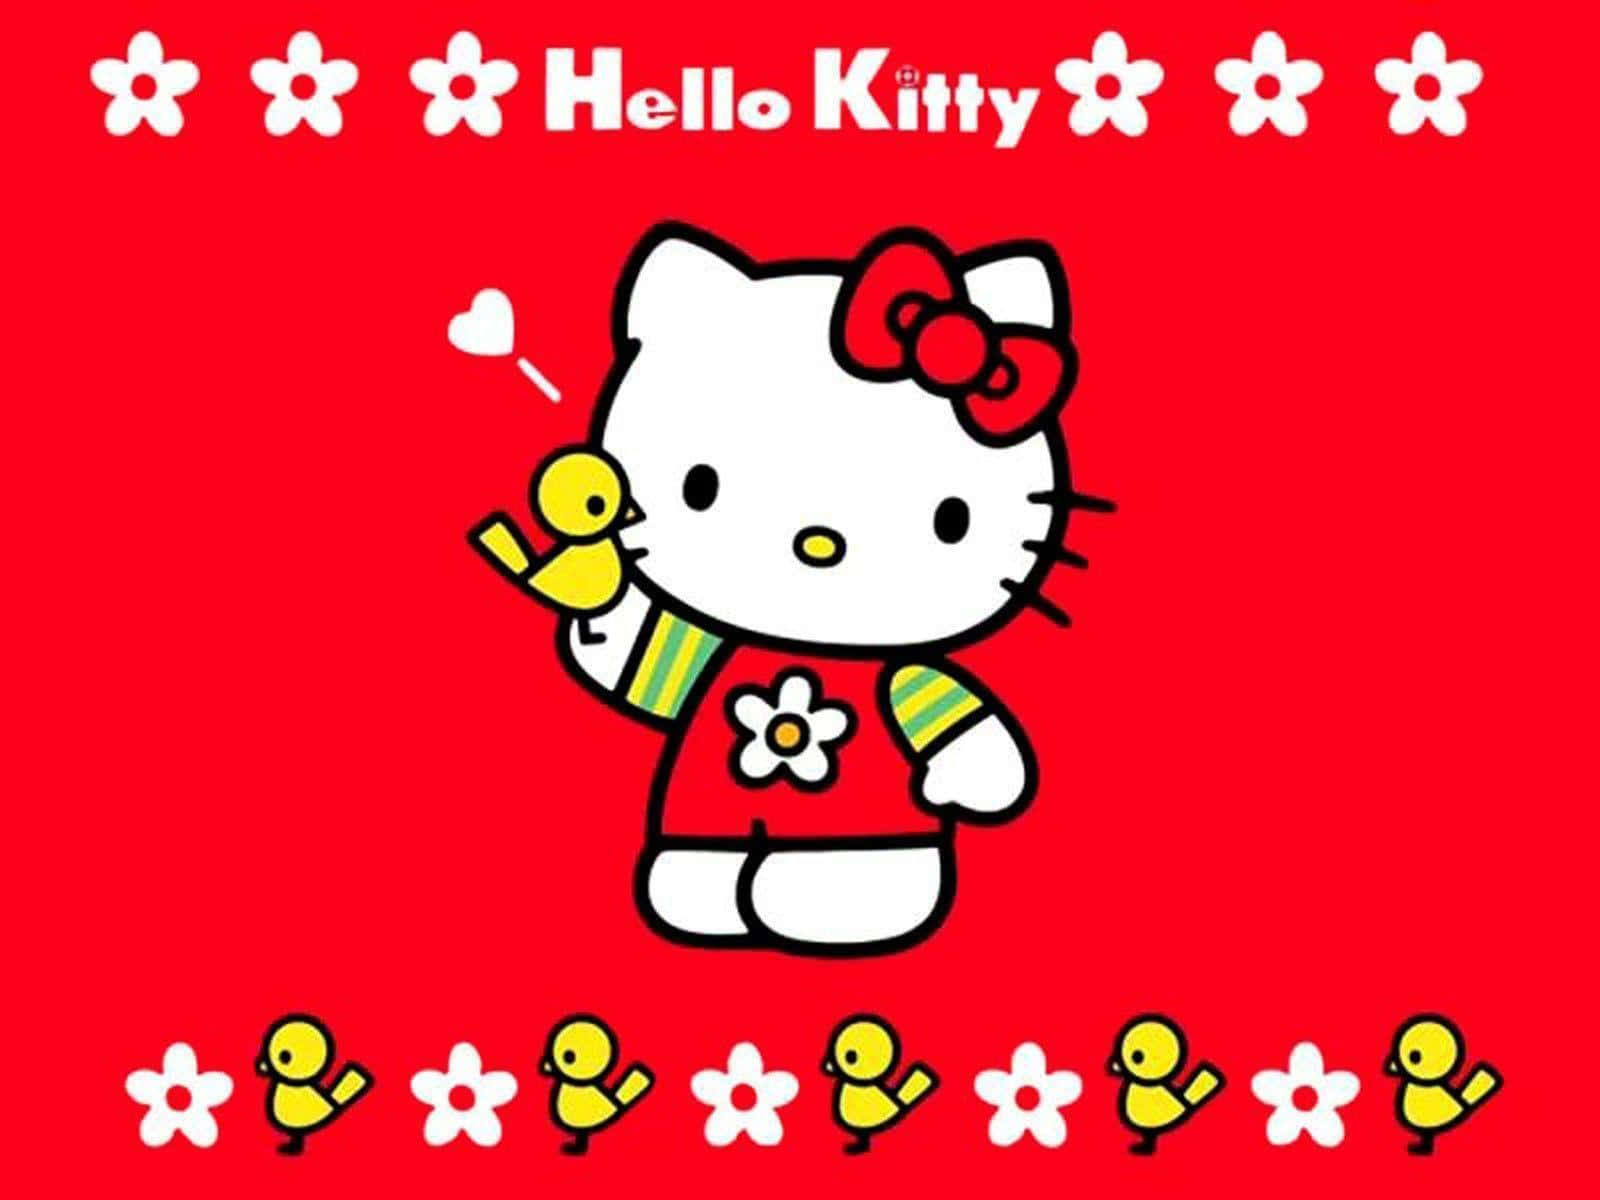 Download Hello Kitty Wallpapers - Wallpapers For Desktop | Wallpapers.com